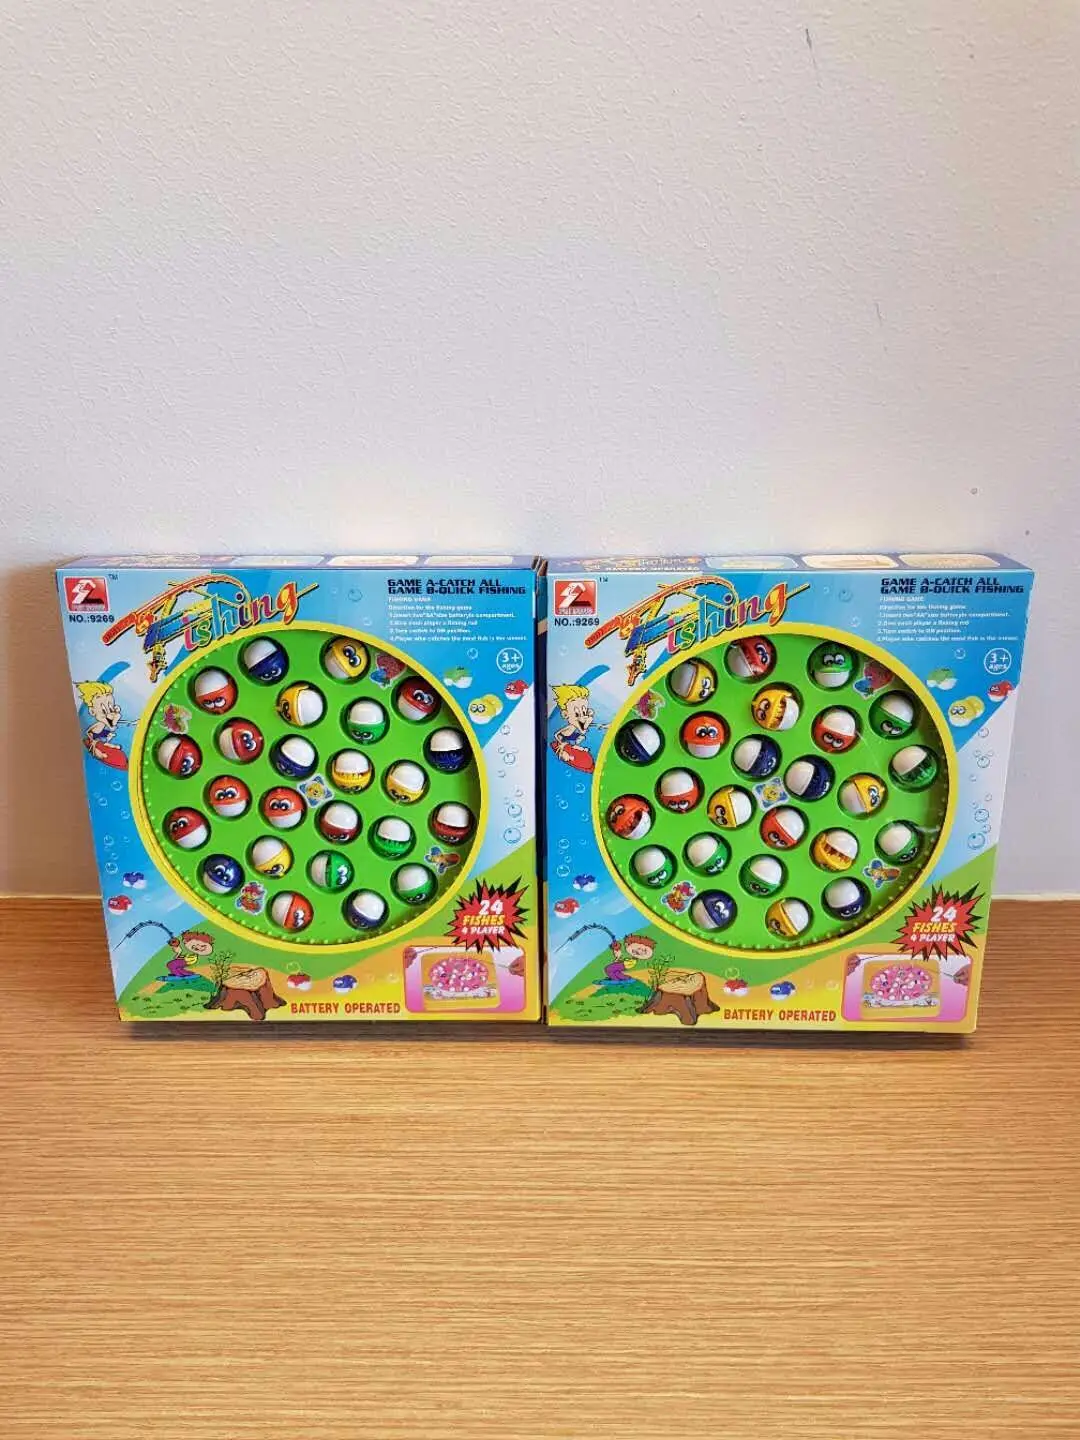 HS001209, Huwsin Toys, Rotating music toy magnetic fishing game